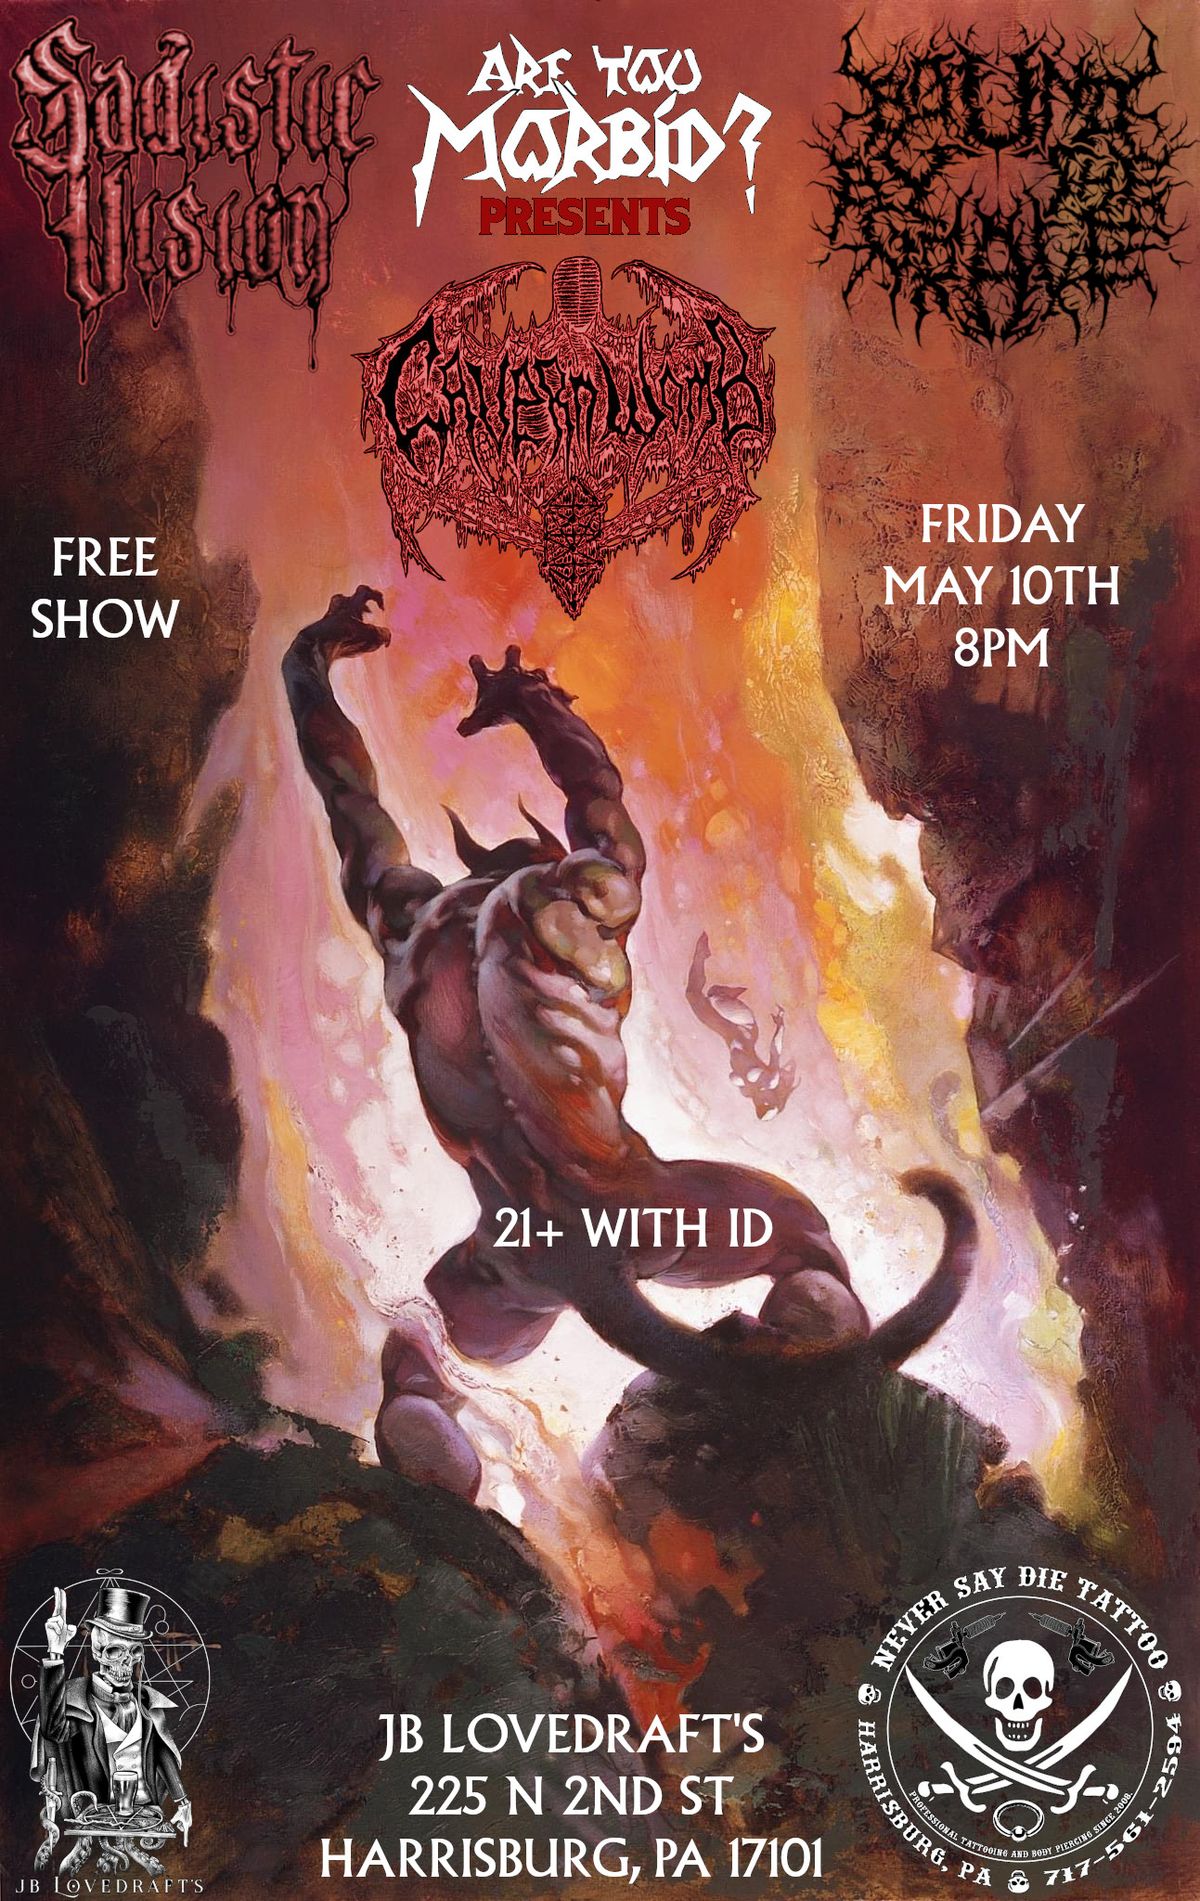 AYM? Presents: Bound By The Grave, Sadistic Vision, and Cavern Womb